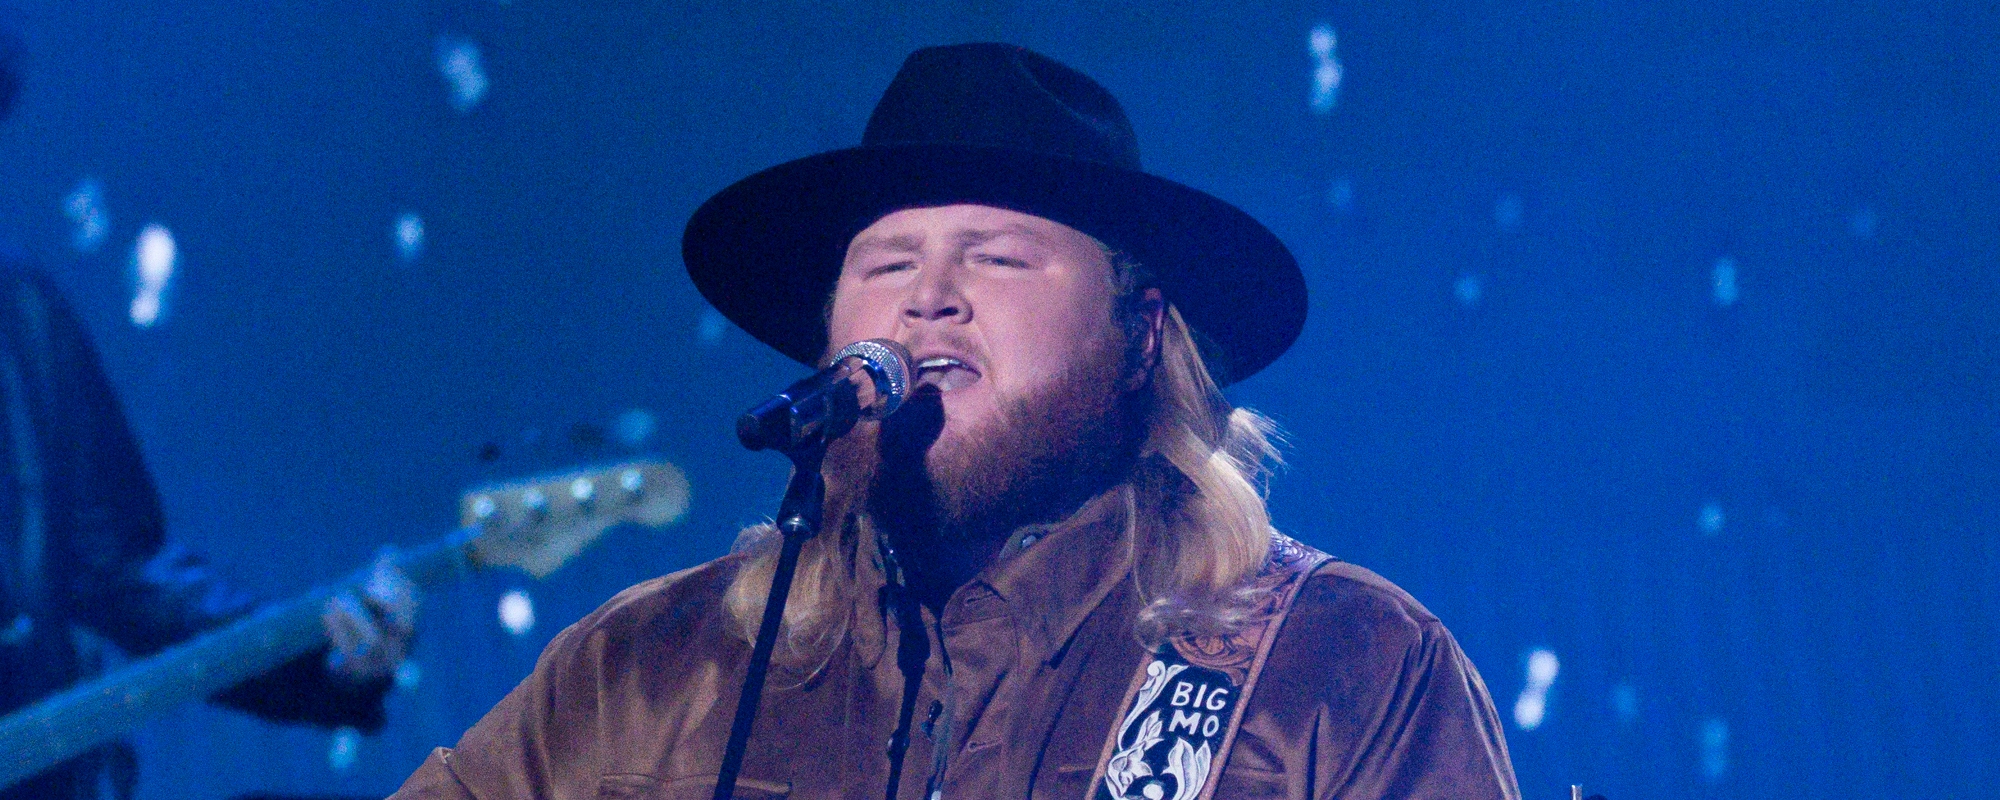 ‘American Idol’ Finalist Will Moseley Rocks the Stage With Bon Jovi’s “It’s My Life”